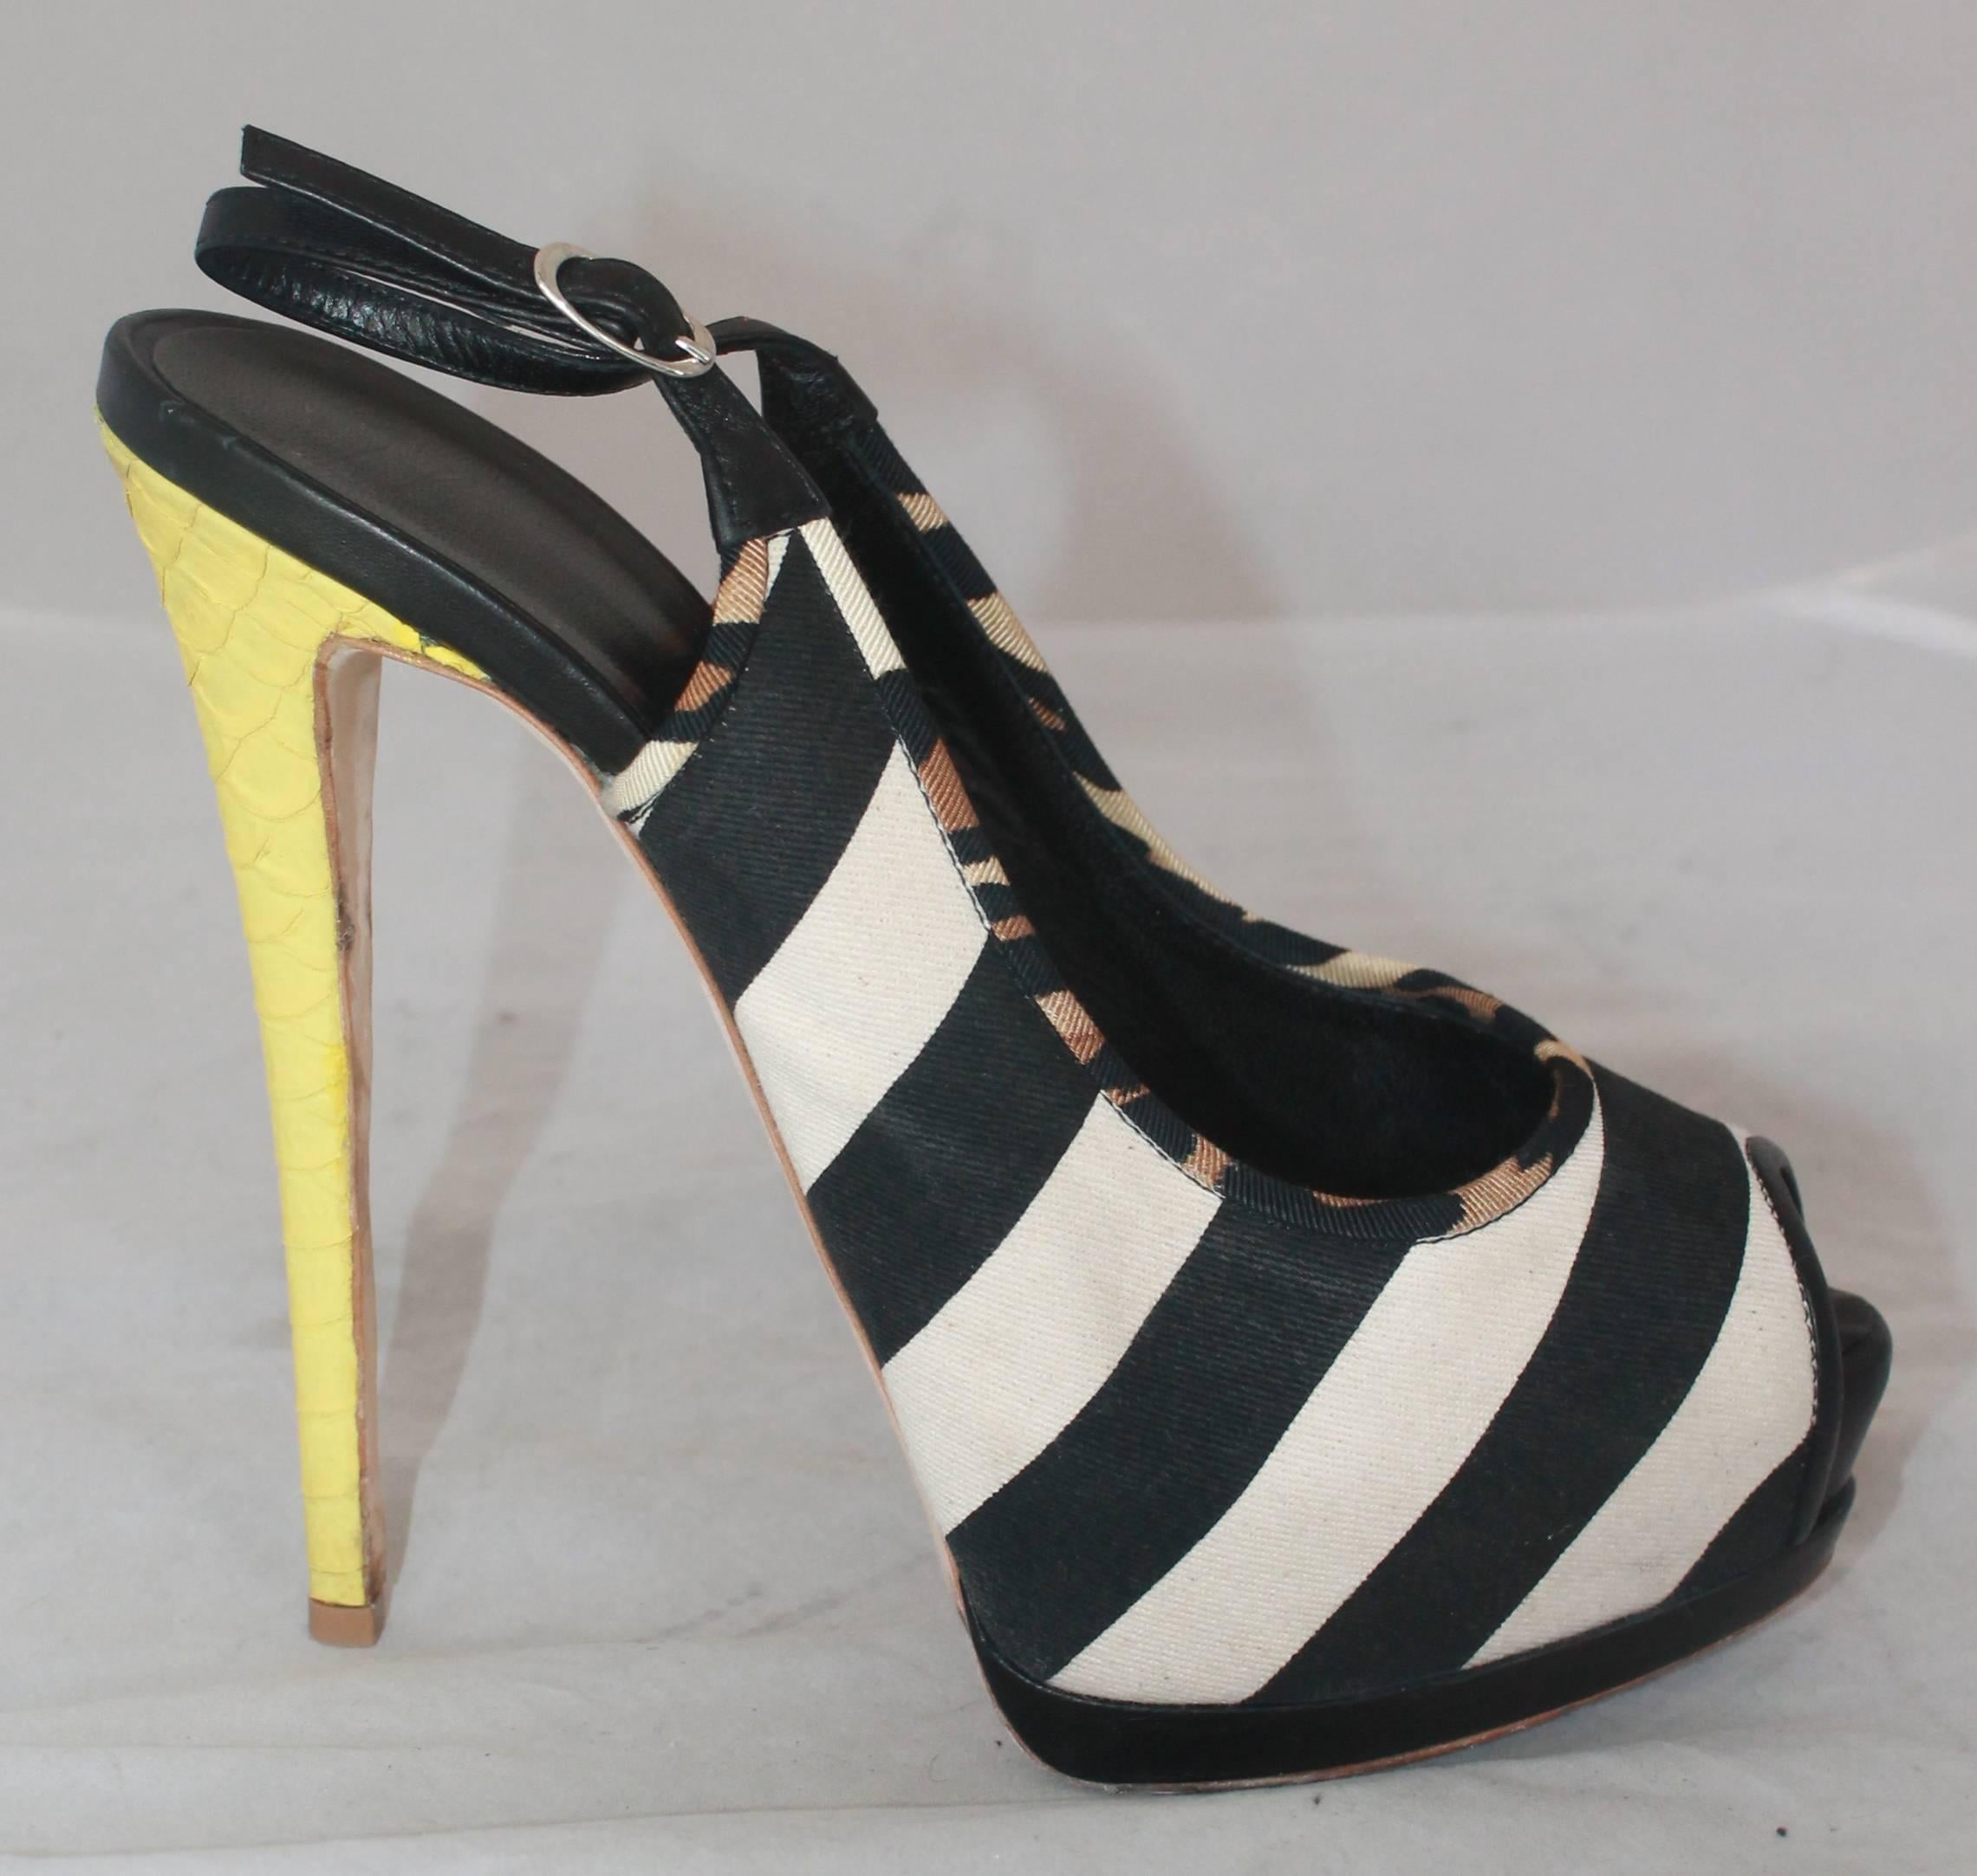 Guiseppe Zanotti Black & White Canvas w/ Yellow Python Platform Slingbacks - 41 .  These fun platform slingbaks are in good condition, they have noticeable wear on the sole and the canvas portion is dirty, but can be cleaned.  They feature a black